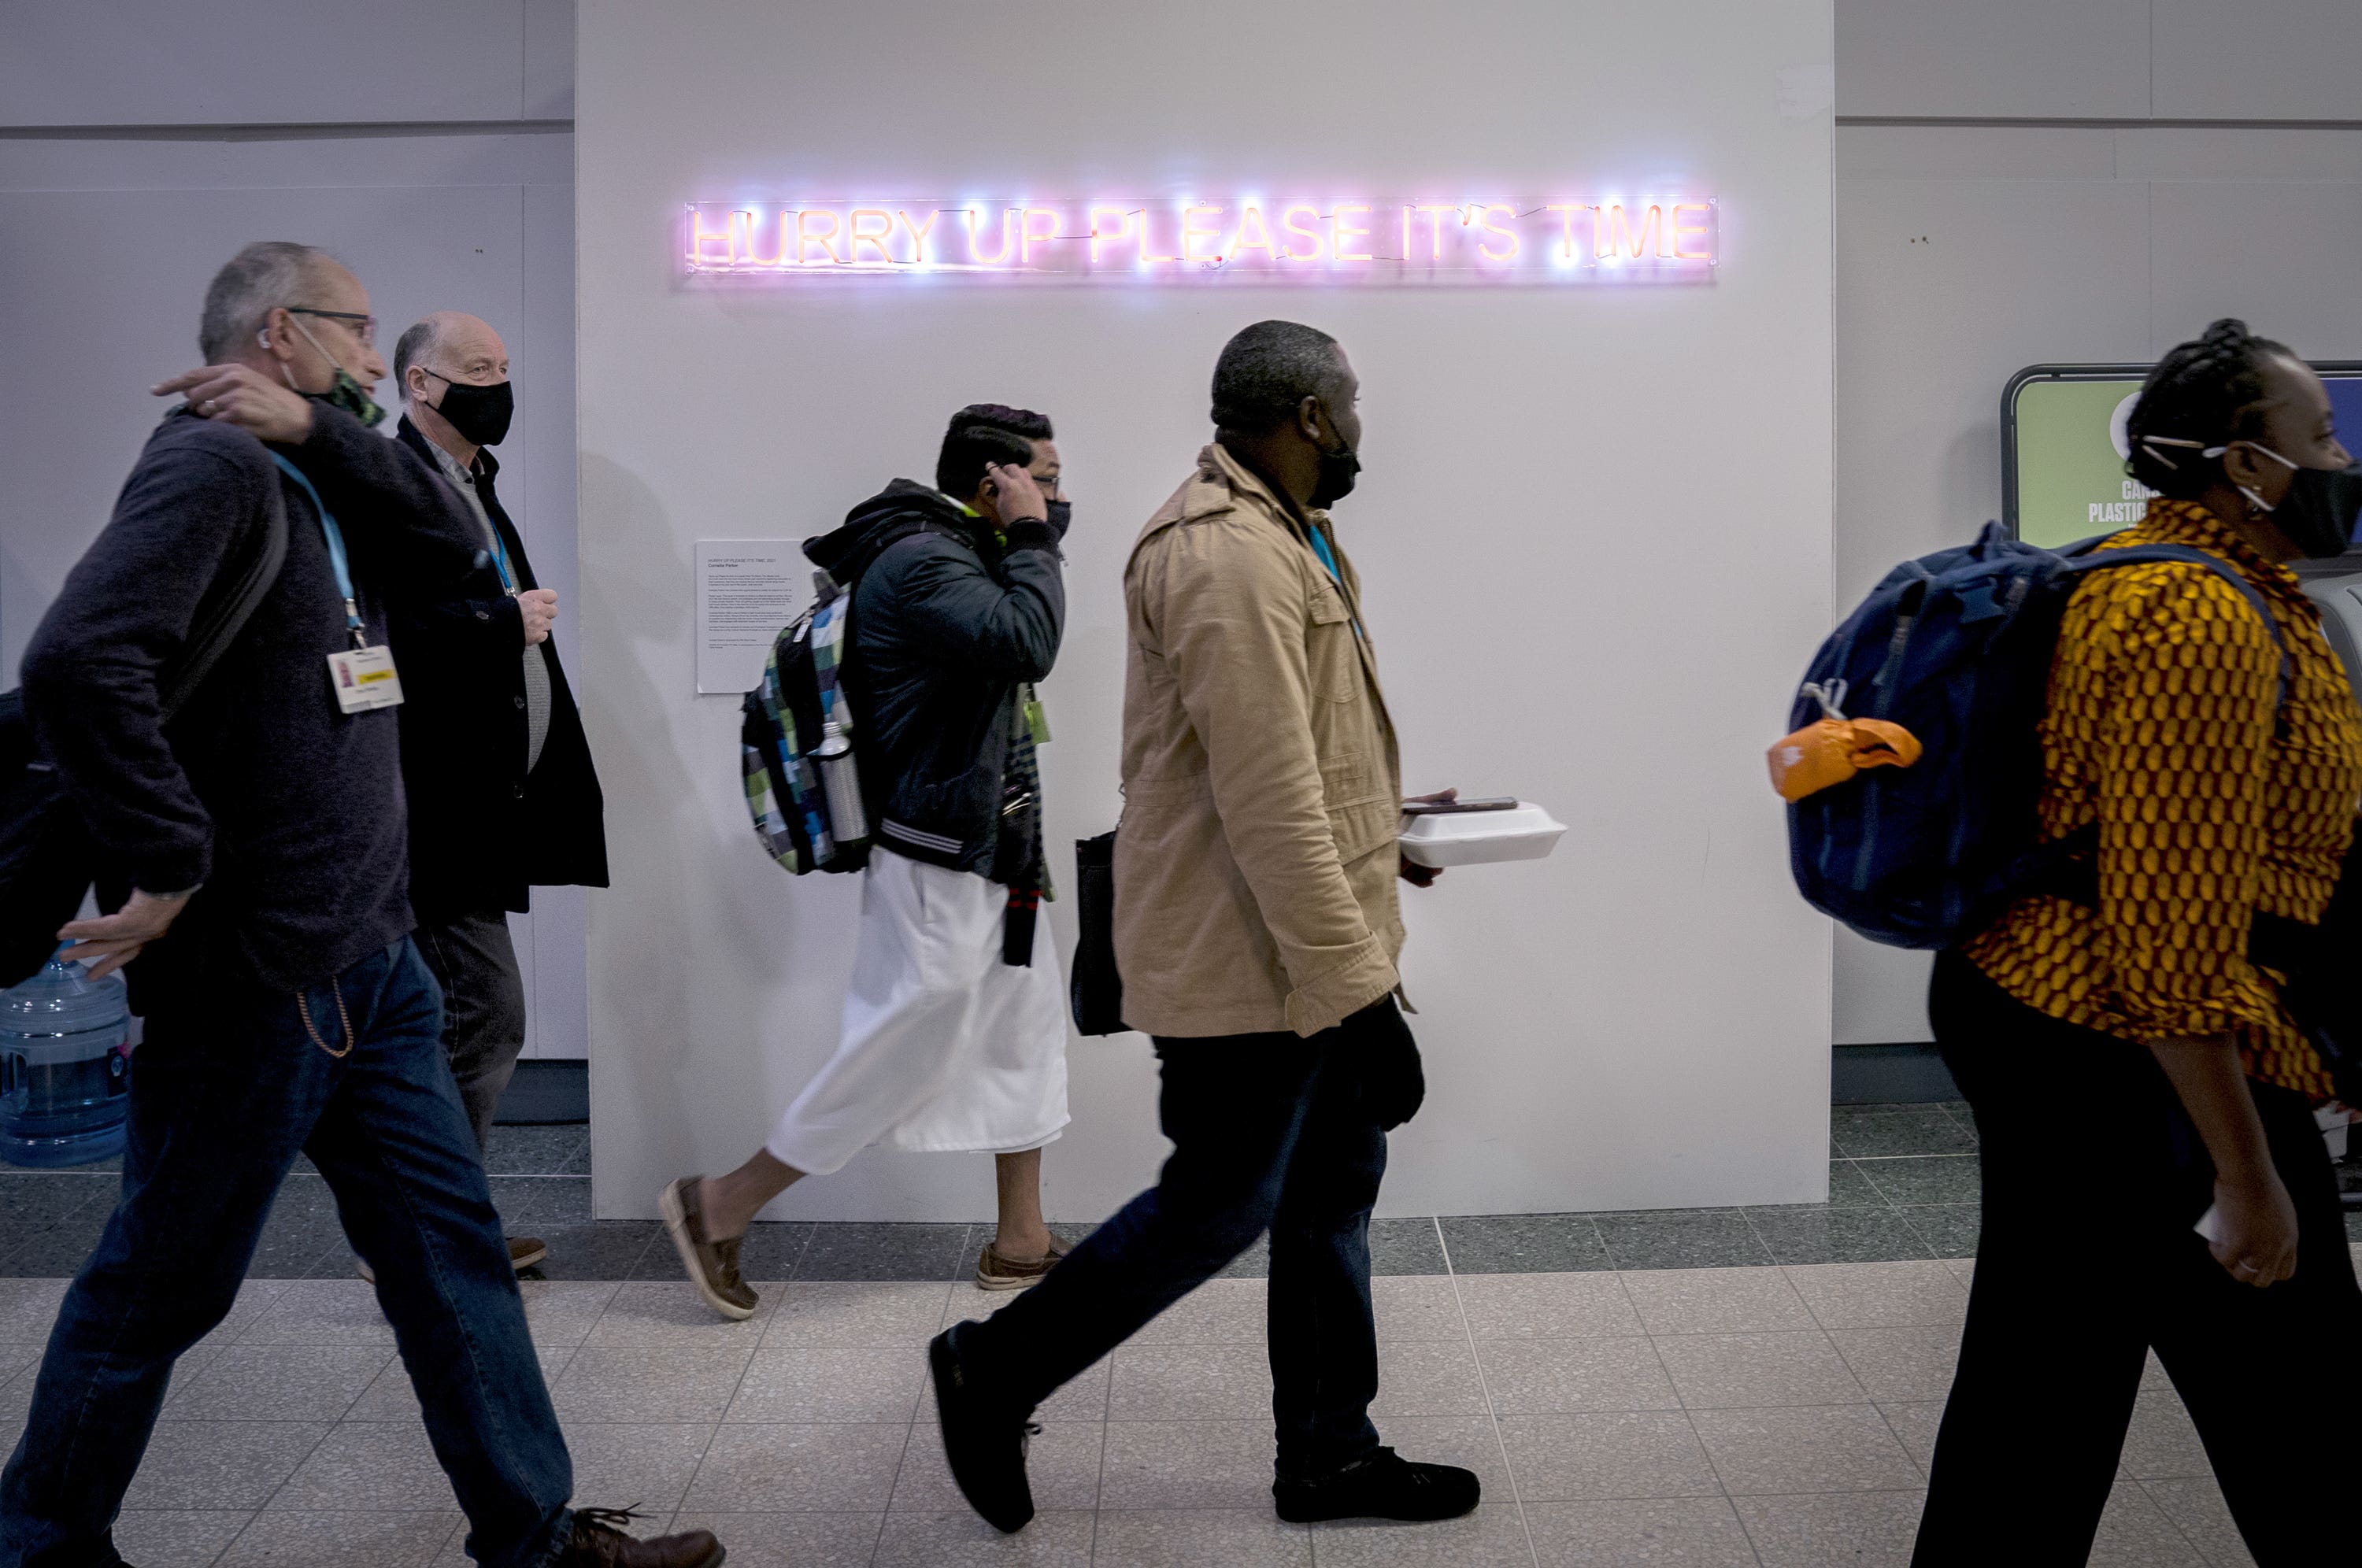 Delegates walk past the neon light installation ‘Hurry Up Please It’s Time’ by artist Cornelia Parker during the COP26 summit.